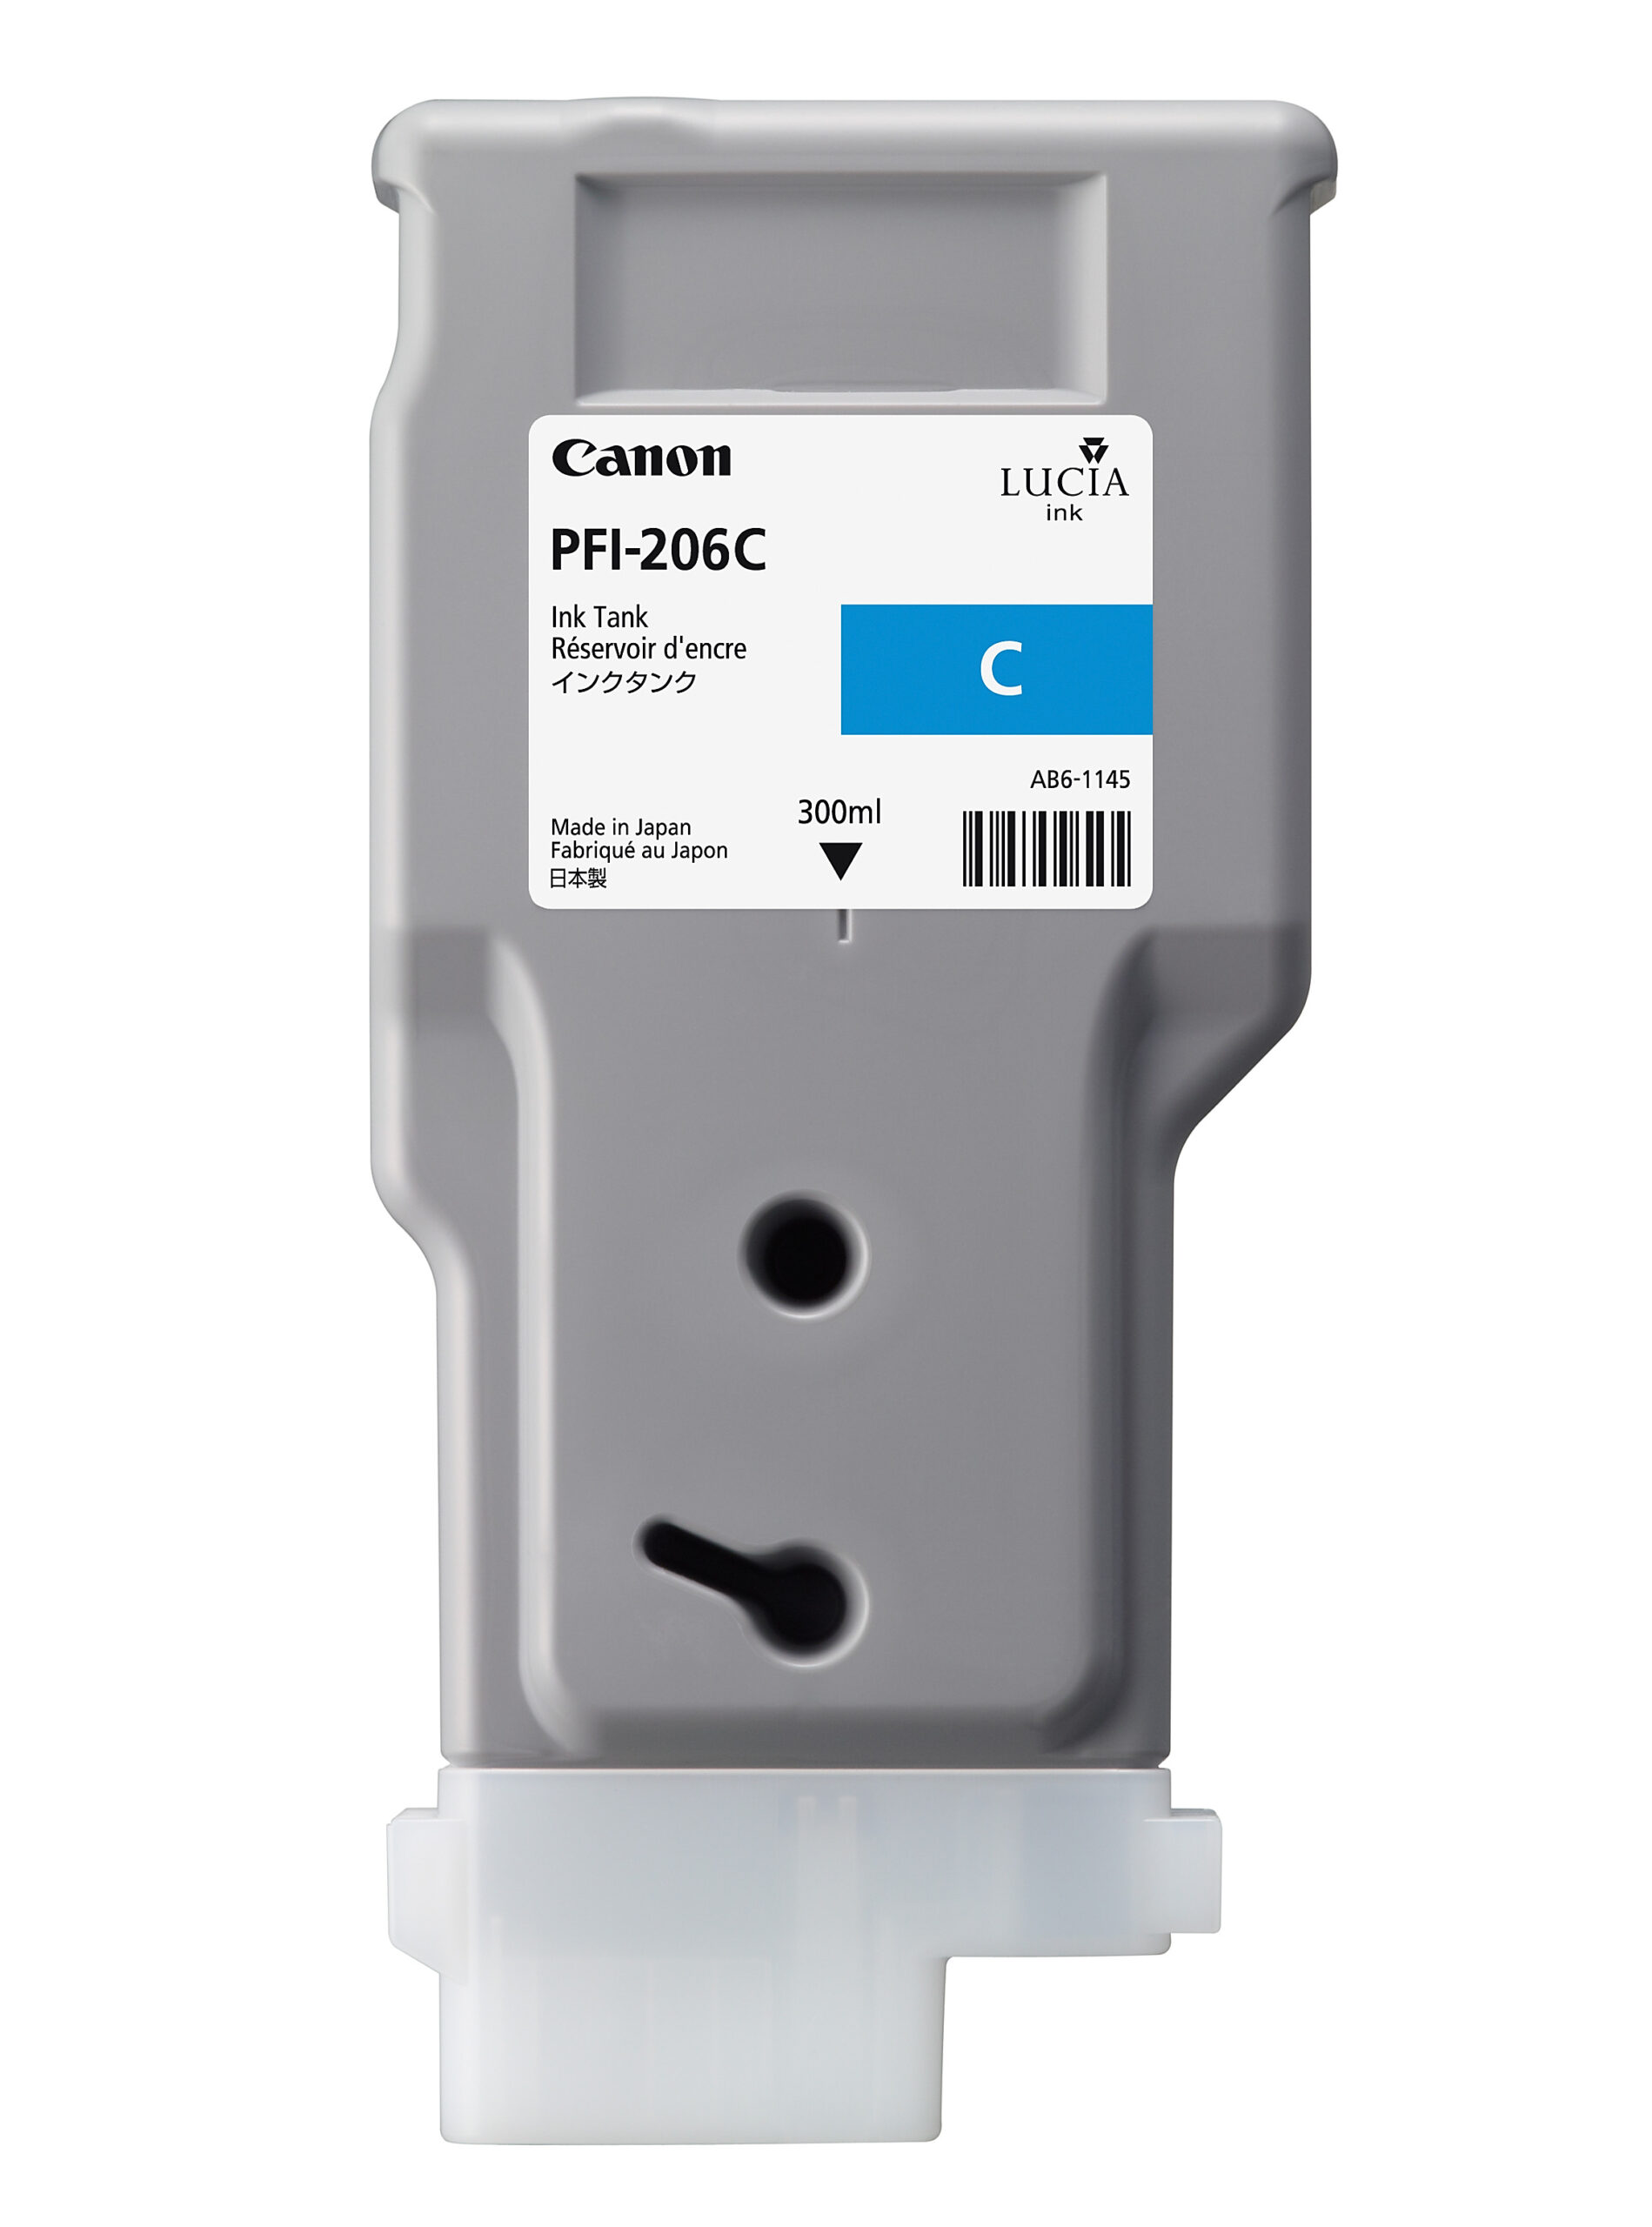 Canon PFI-206C Printer Ink Cartridge - Cyan Ink Tank - 300ml - 5304B001AA - for Canon iPF6400, iPF6400S, iPF6400SE, iPF6450 Printers - express delivery from GDS - Graphic Design Supplies Ltd